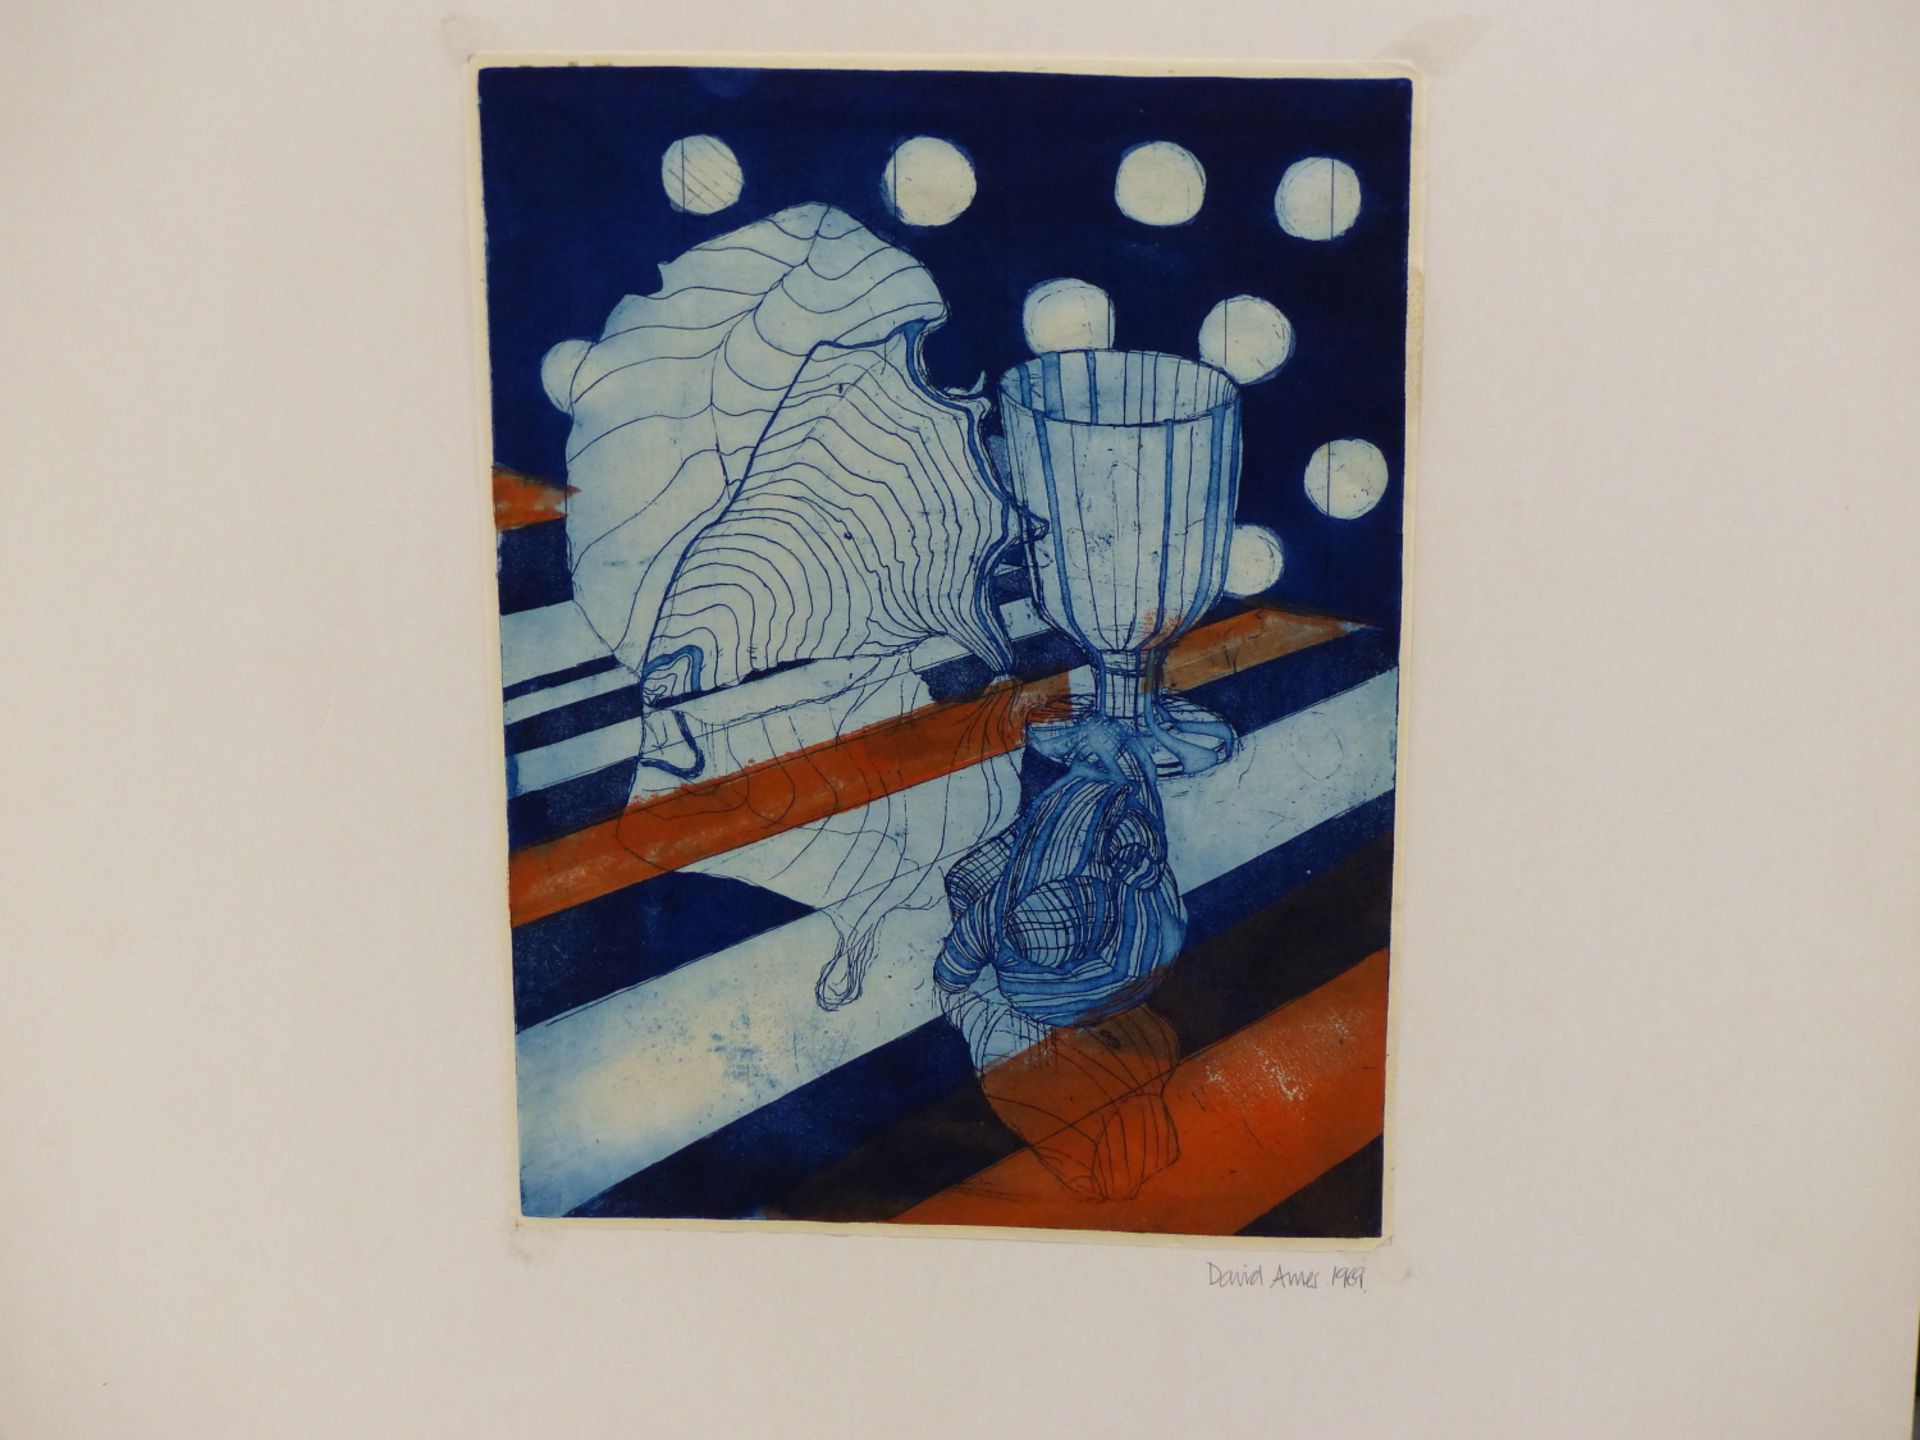 DAVID AMES (20TH CENTURY) ARR. ABSTRACT STILL LIFE, COLOUR WOODBLOCK PRINT, SIGNED AND DATED 1969. - Image 3 of 4